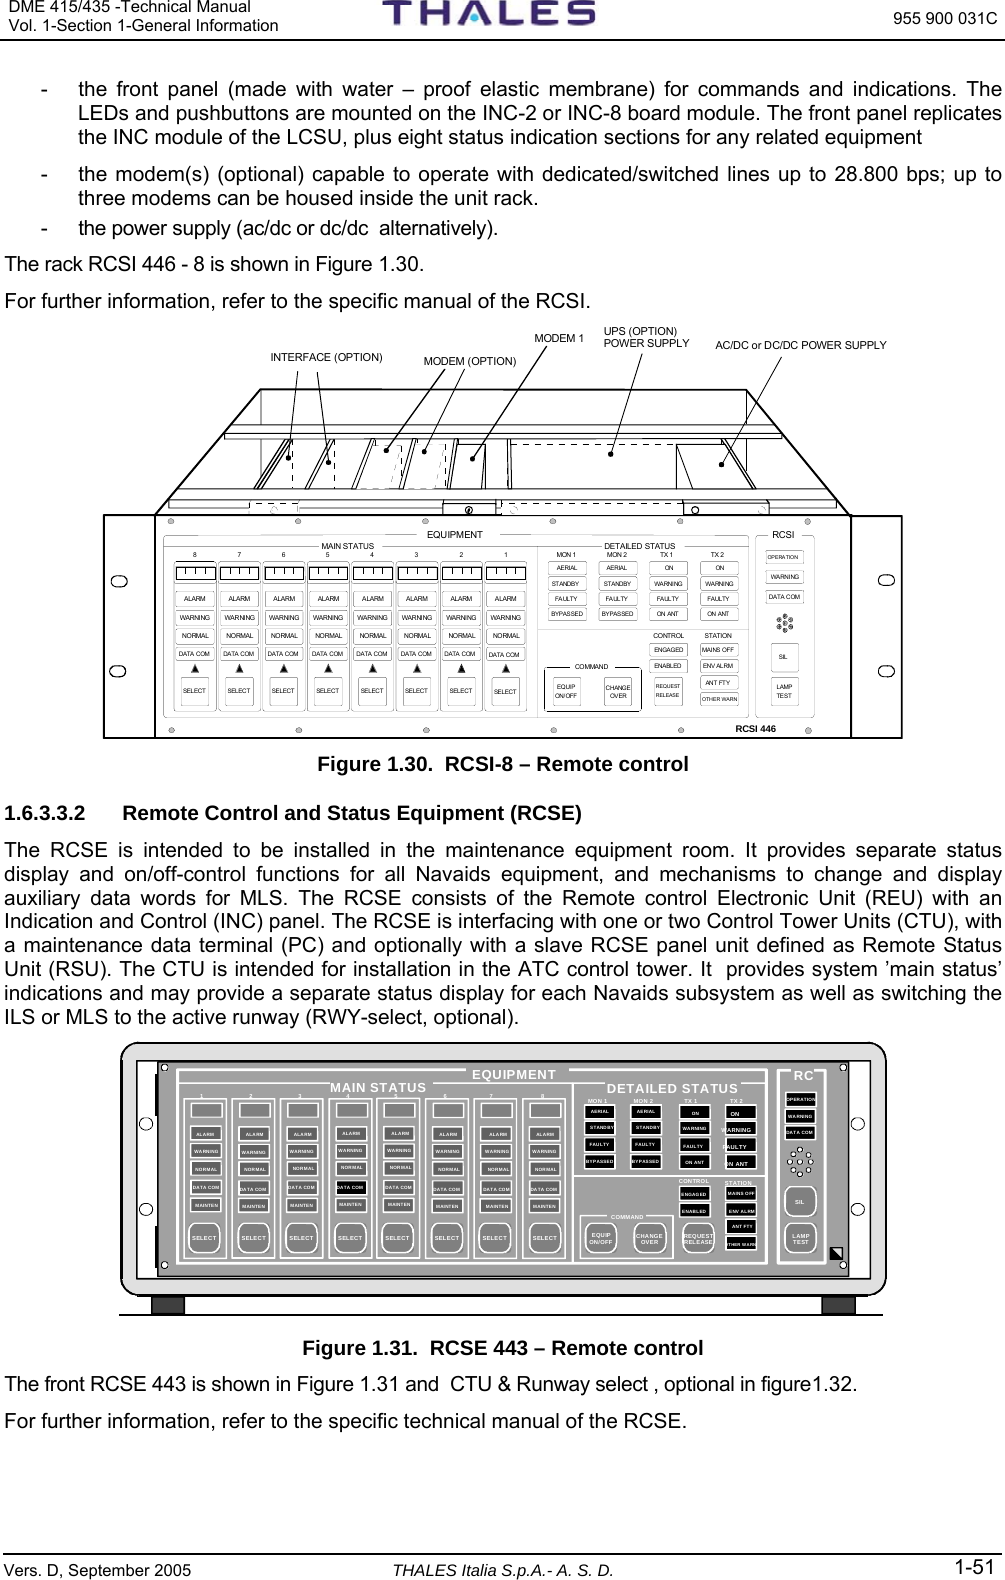 DME 415/435 -Technical Manual Vol. 1-Section 1-General Information  955 900 031C Vers. D, September 2005 THALES Italia S.p.A.- A. S. D. 1-51 -  the front panel (made with water – proof elastic membrane) for commands and indications. The LEDs and pushbuttons are mounted on the INC-2 or INC-8 board module. The front panel replicates the INC module of the LCSU, plus eight status indication sections for any related equipment -  the modem(s) (optional) capable to operate with dedicated/switched lines up to 28.800 bps; up to three modems can be housed inside the unit rack. -  the power supply (ac/dc or dc/dc  alternatively). The rack RCSI 446 - 8 is shown in Figure 1.30. For further information, refer to the specific manual of the RCSI. SELECTWAR NI NGNORMALDATA COMALARMSELECTWAR NI NGNORMA LDATA COMALARMSELECTWAR NI NGNORMALDATA COMALARMSELECTWAR NI NGNORMALDATA COMALARMSELECTWAR NI NGNORMALDATA COMALARMSELECTWAR NI NGNORMA LDATA COMALARMSELECTWA RNI N GNORMALDATA COMALARMSELECTWAR NI NGNORMALDATA COMALARMEQUIPMENT RCSIRCSI 4461234567DETAILED STATUSMAIN STATUSREQUESTRELEASEMON 1STANDBYAERIALMON 2 TX 1ON ANTFAULTYWA RNI NGONTX 2ON A NTFAULTYWA RNI NGONOPERATIONWA RNI NGDATA COMLAMPTESTSILFAULTYBYPASSEDFAULTYBYPASSEDOTHER WARNANT FTYENV ALRMMAI NS OFFENABLEDENGAGEDSTATIONCONTROLCHANGEOV EREQUIPON/ OFFCOMMAN DAERIALSTANDBY8INTERFACE (OPTION) MODEM (OPTION)MODEM 1 UPS (OPTION)POWER SUPPLY AC/DC or DC/DC POWER SUPPLY  Figure 1.30.  RCSI-8 – Remote control 1.6.3.3.2  Remote Control and Status Equipment (RCSE) The RCSE is intended to be installed in the maintenance equipment room. It provides separate status display and on/off-control functions for all Navaids equipment, and mechanisms to change and display auxiliary data words for MLS. The RCSE consists of the Remote control Electronic Unit (REU) with an Indication and Control (INC) panel. The RCSE is interfacing with one or two Control Tower Units (CTU), with a maintenance data terminal (PC) and optionally with a slave RCSE panel unit defined as Remote Status Unit (RSU). The CTU is intended for installation in the ATC control tower. It  provides system ’main status’ indications and may provide a separate status display for each Navaids subsystem as well as switching the ILS or MLS to the active runway (RWY-select, optional). MAIN STATUS DETAILED STATUSEQUIPMENTCOMMANDRCMON 1 MON 2 TX 1 TX 212 345 67 8CONTROL STATIONALARMWARNINGNORMALDATA COMMAINTENALARMWARNINGNOR MALDAT A COMMAINTENALARMWARNINGNOR MALDAT A COMMAINTENALARMWARNINGNORMALDATA COMMAINTENALARMWARNINGNORMALDATA COMMAINTENALARMWARNINGNORMALDATA COMMAINTENAERIALSTANDBYFAULTYBYPASSEDONWARNINGFAULTYON ANTONWARNINGFAULTYON ANTENGAGEDENABLEDMAINS OFFENV ALRMANT  FTYOTHER WARNOPERATIONWARNINGDATA COMALARMWARNINGNOR MALDAT A COMMAINTENALA RMWARNINGNOR MALDAT A COMMAINTENAERIALSTANDBYFAULTYBYPASSEDSELECT SELECT SELECT SELECT SELECT SELECT SELECT SELECT EQUIPON/OFF CHANGEOVER REQUESTRELEASE LAMPTESTSIL  Figure 1.31.  RCSE 443 – Remote control  The front RCSE 443 is shown in Figure 1.31 and  CTU &amp; Runway select , optional in figure1.32. For further information, refer to the specific technical manual of the RCSE.  